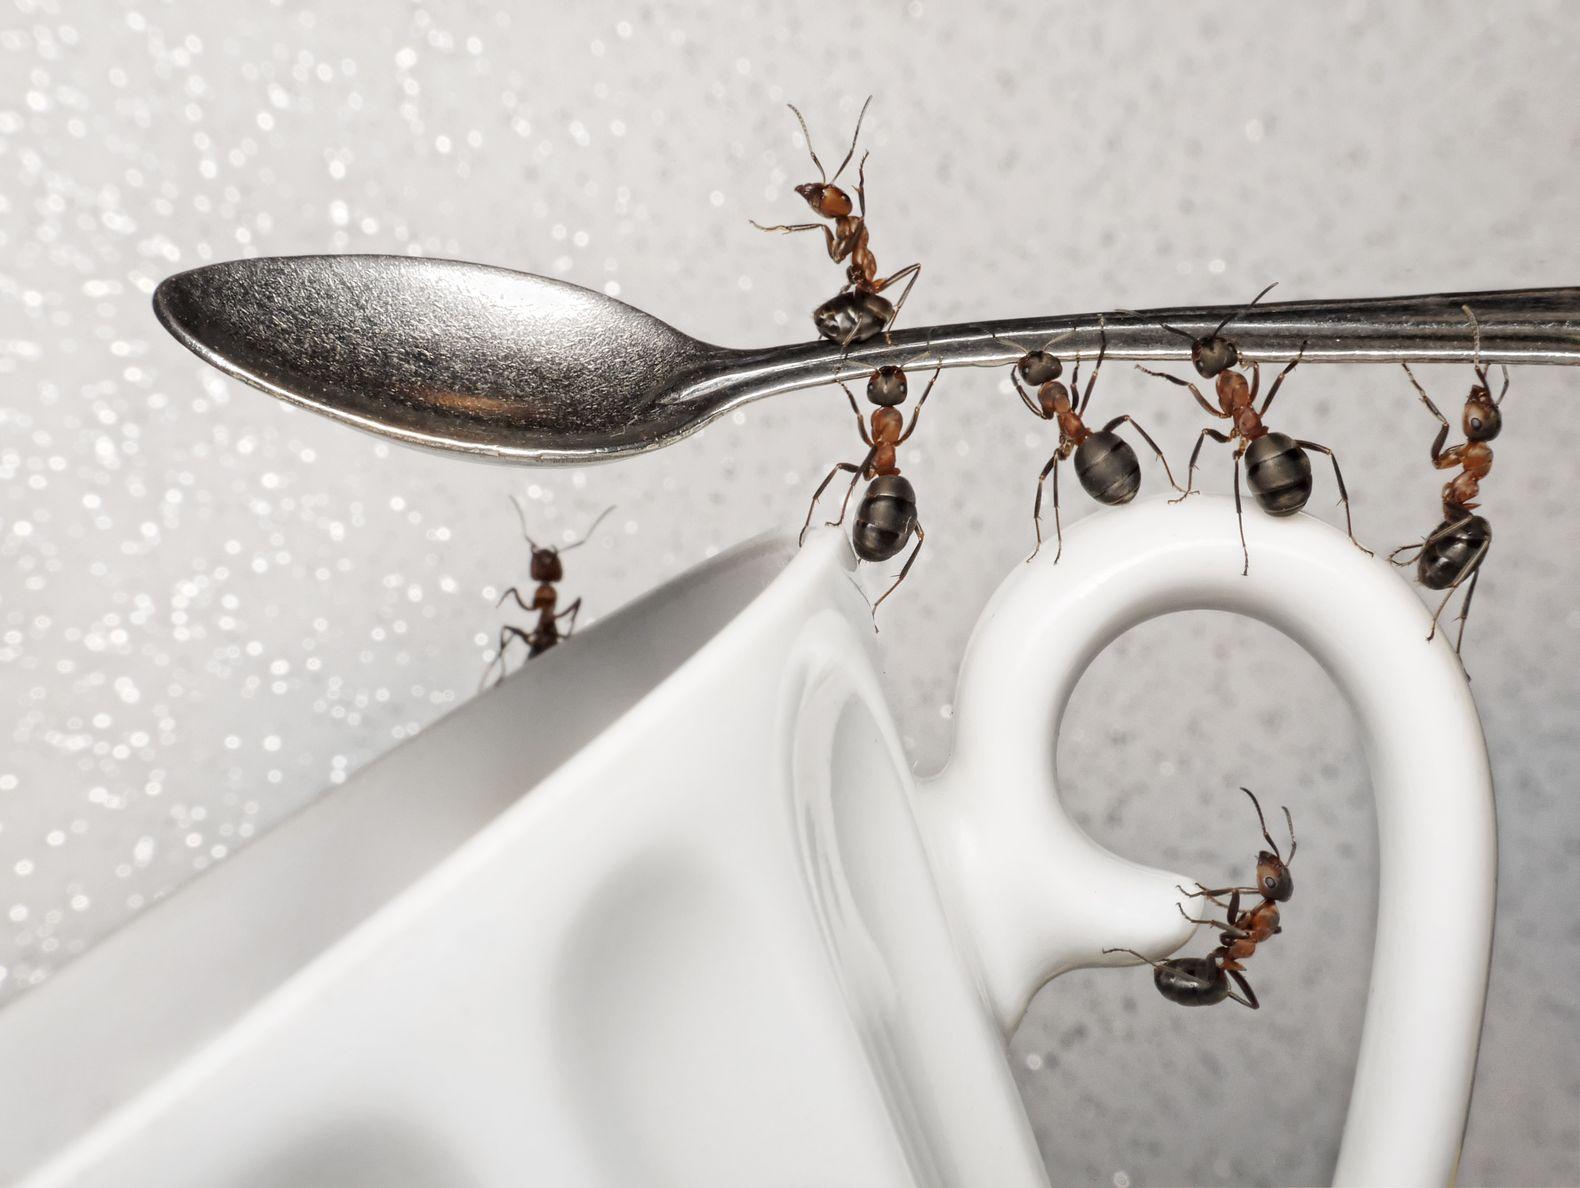 ants in kitchen sink but not on anything